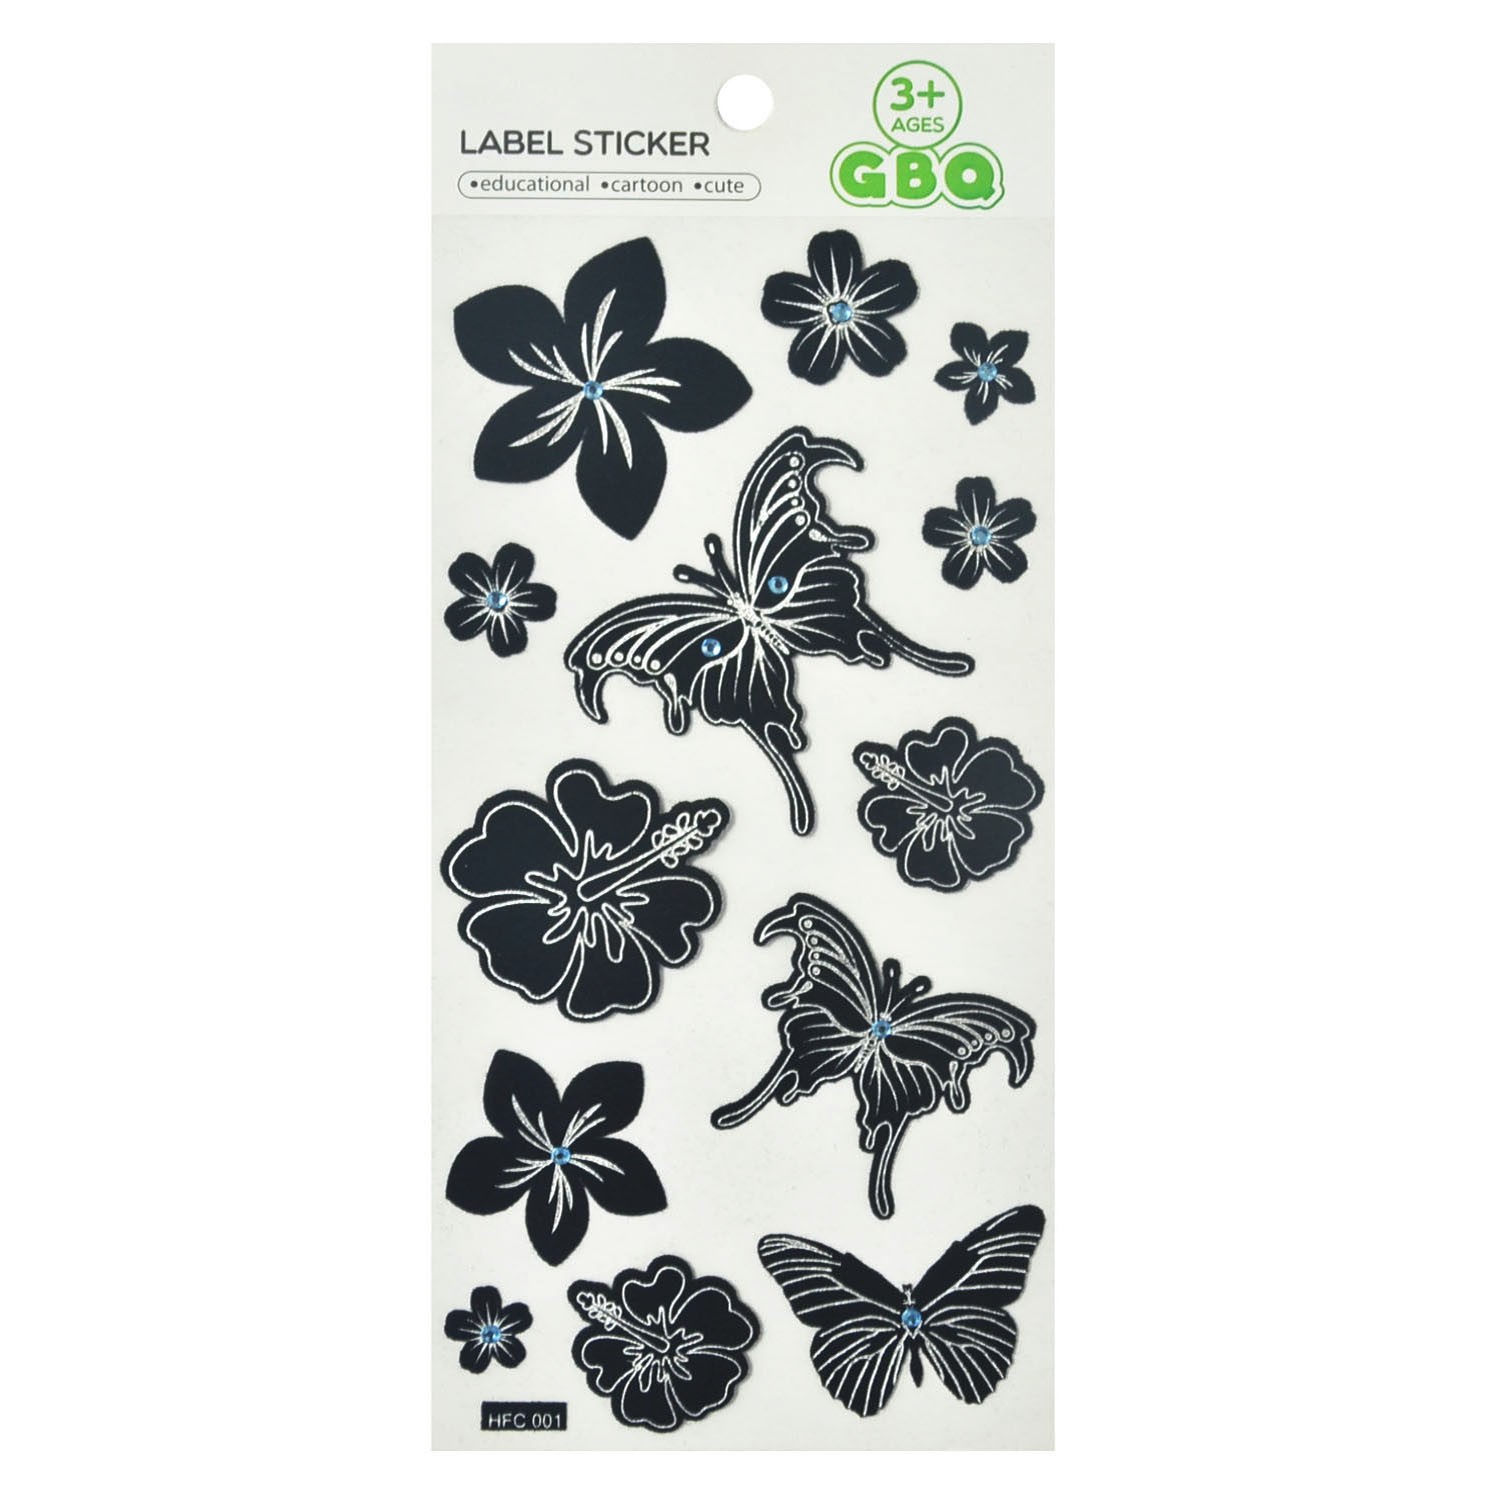 Decor Your Bag Cloth With These Novelty Flocking Felt Stickers Custom Designs